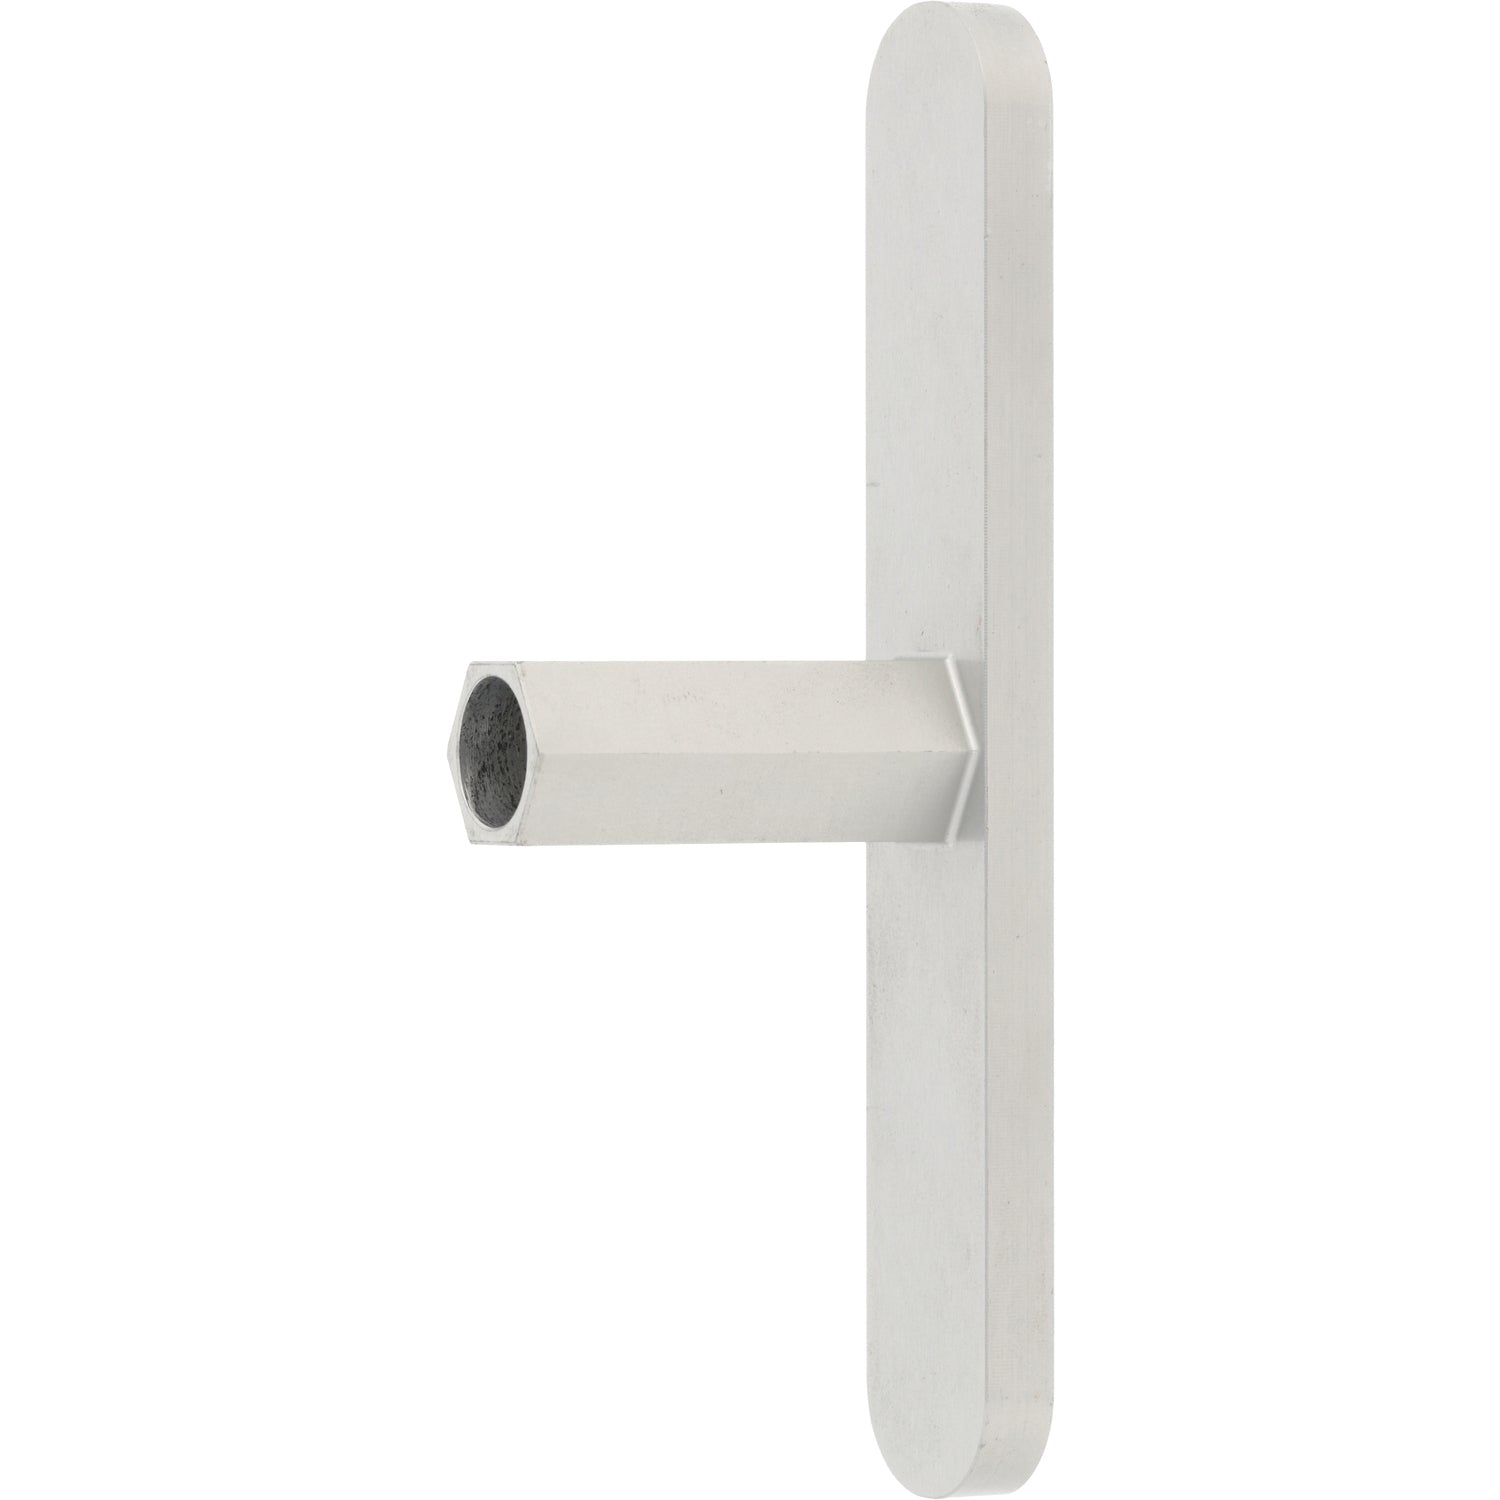 A &quot;T&quot; shaped part made of hard anodized aluminum with flat  rounded handle placed vertically and a horizontal hollow hexagonal post shown on white background. 